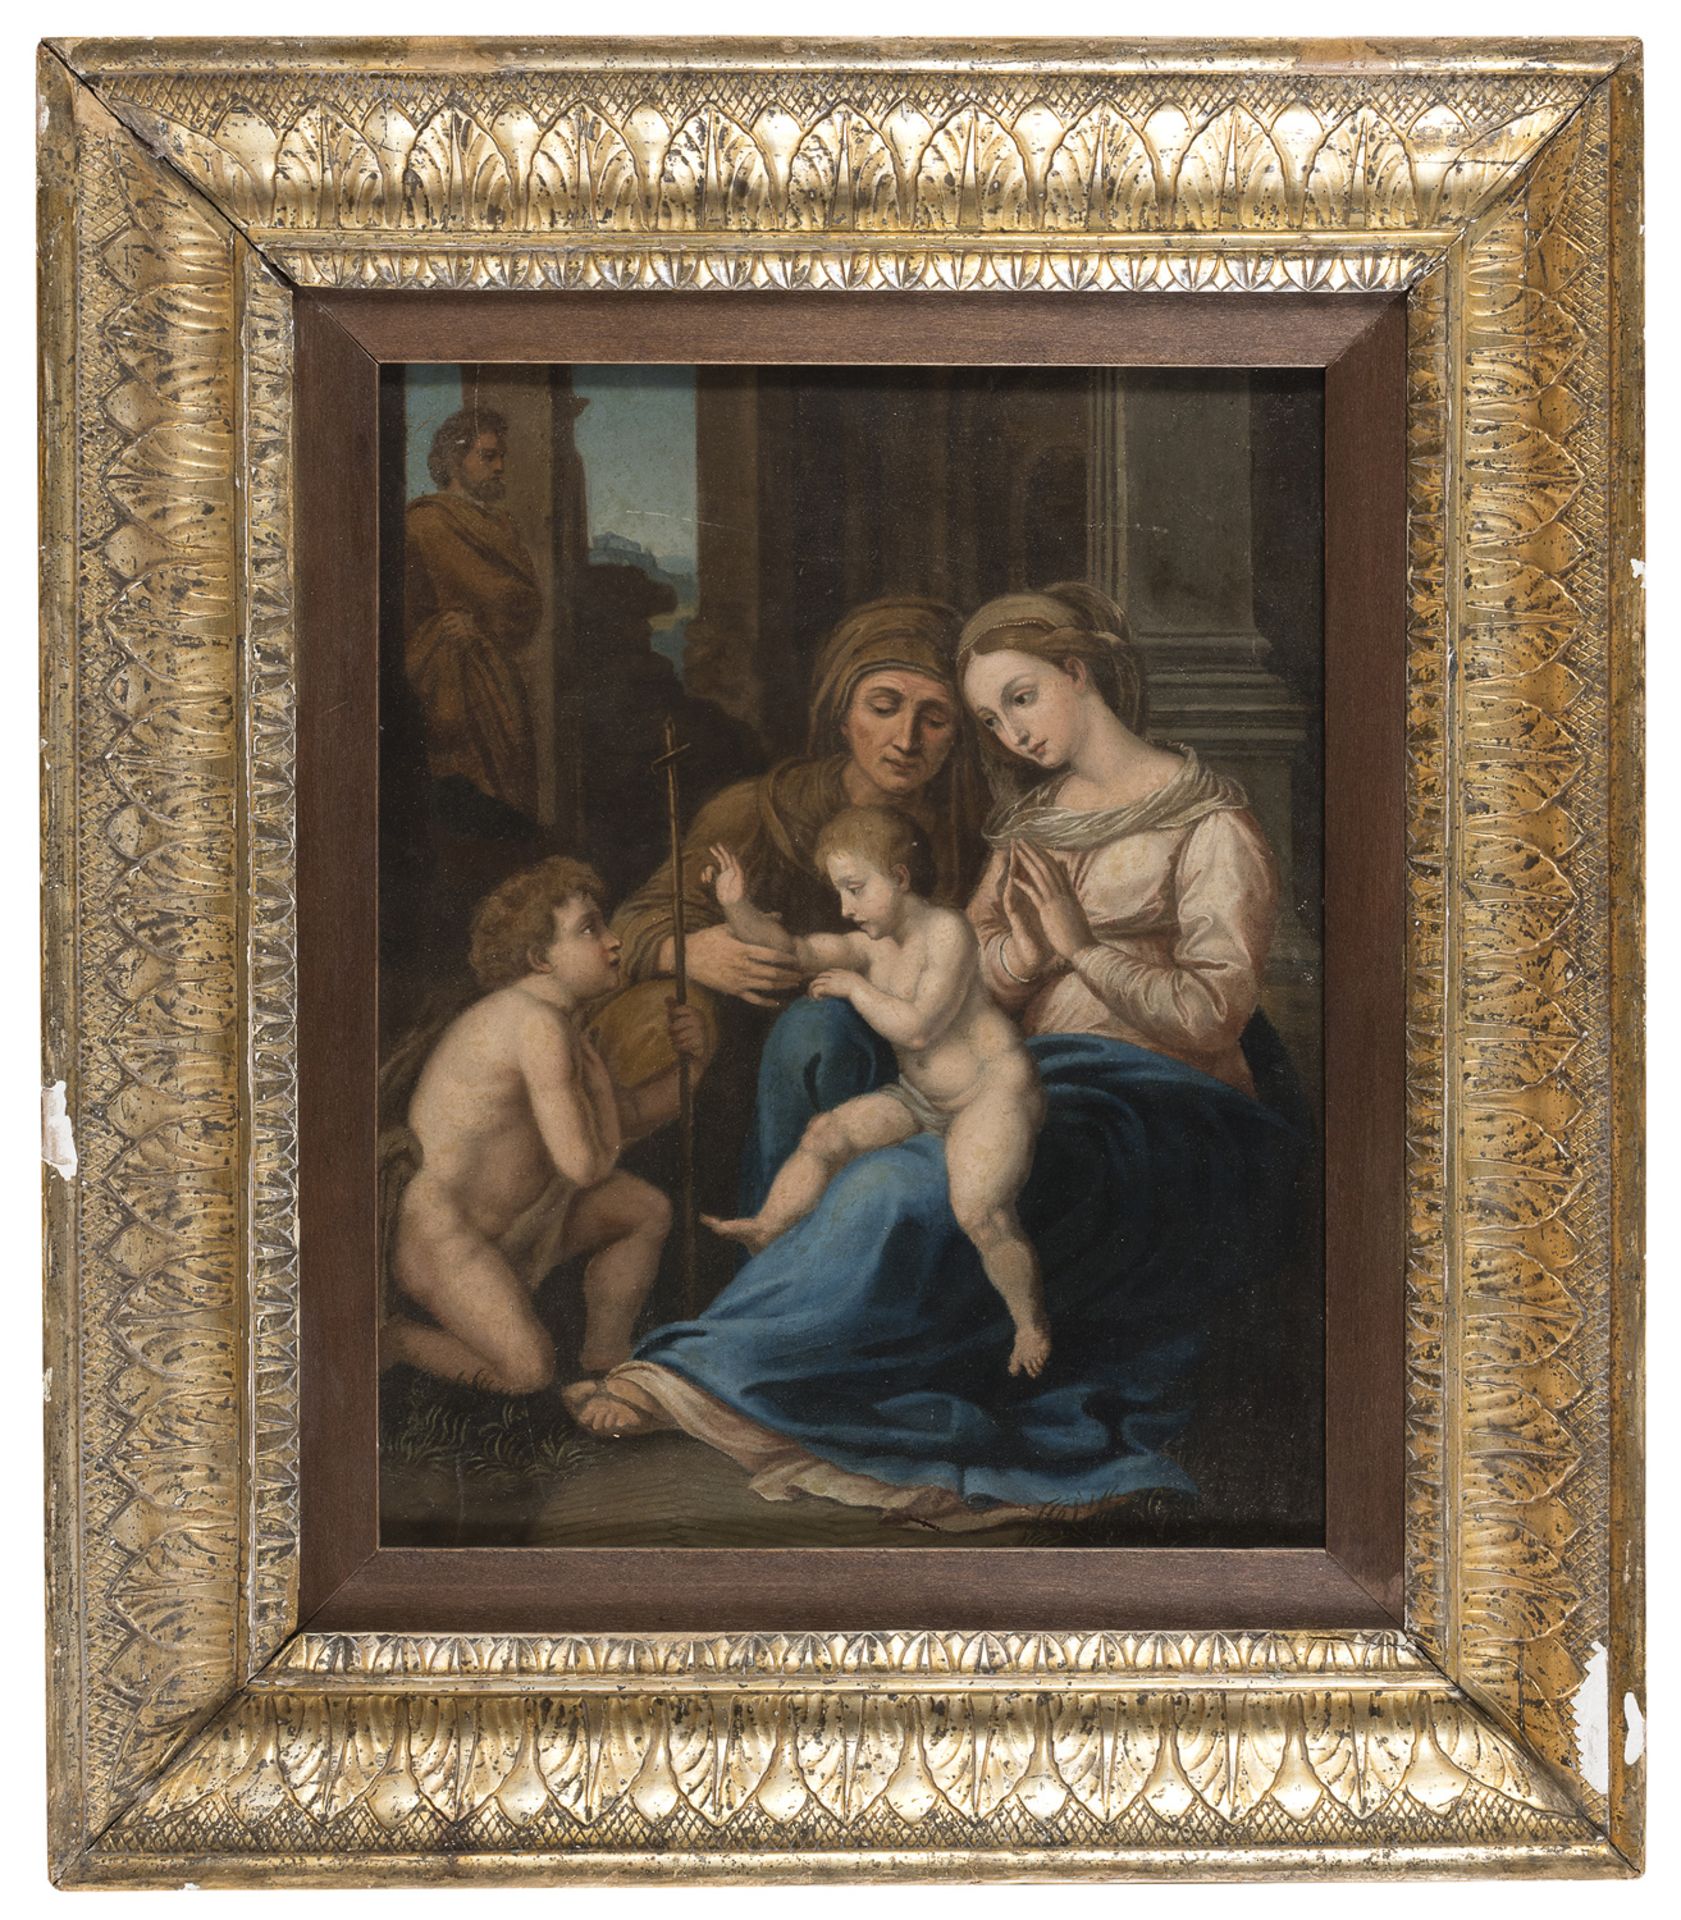 CENTRAL ITALY OIL PAINTING OF OUR LADY OF DIVINE LOVE AFTER RAFFAELLO LATE 16TH CENTURY